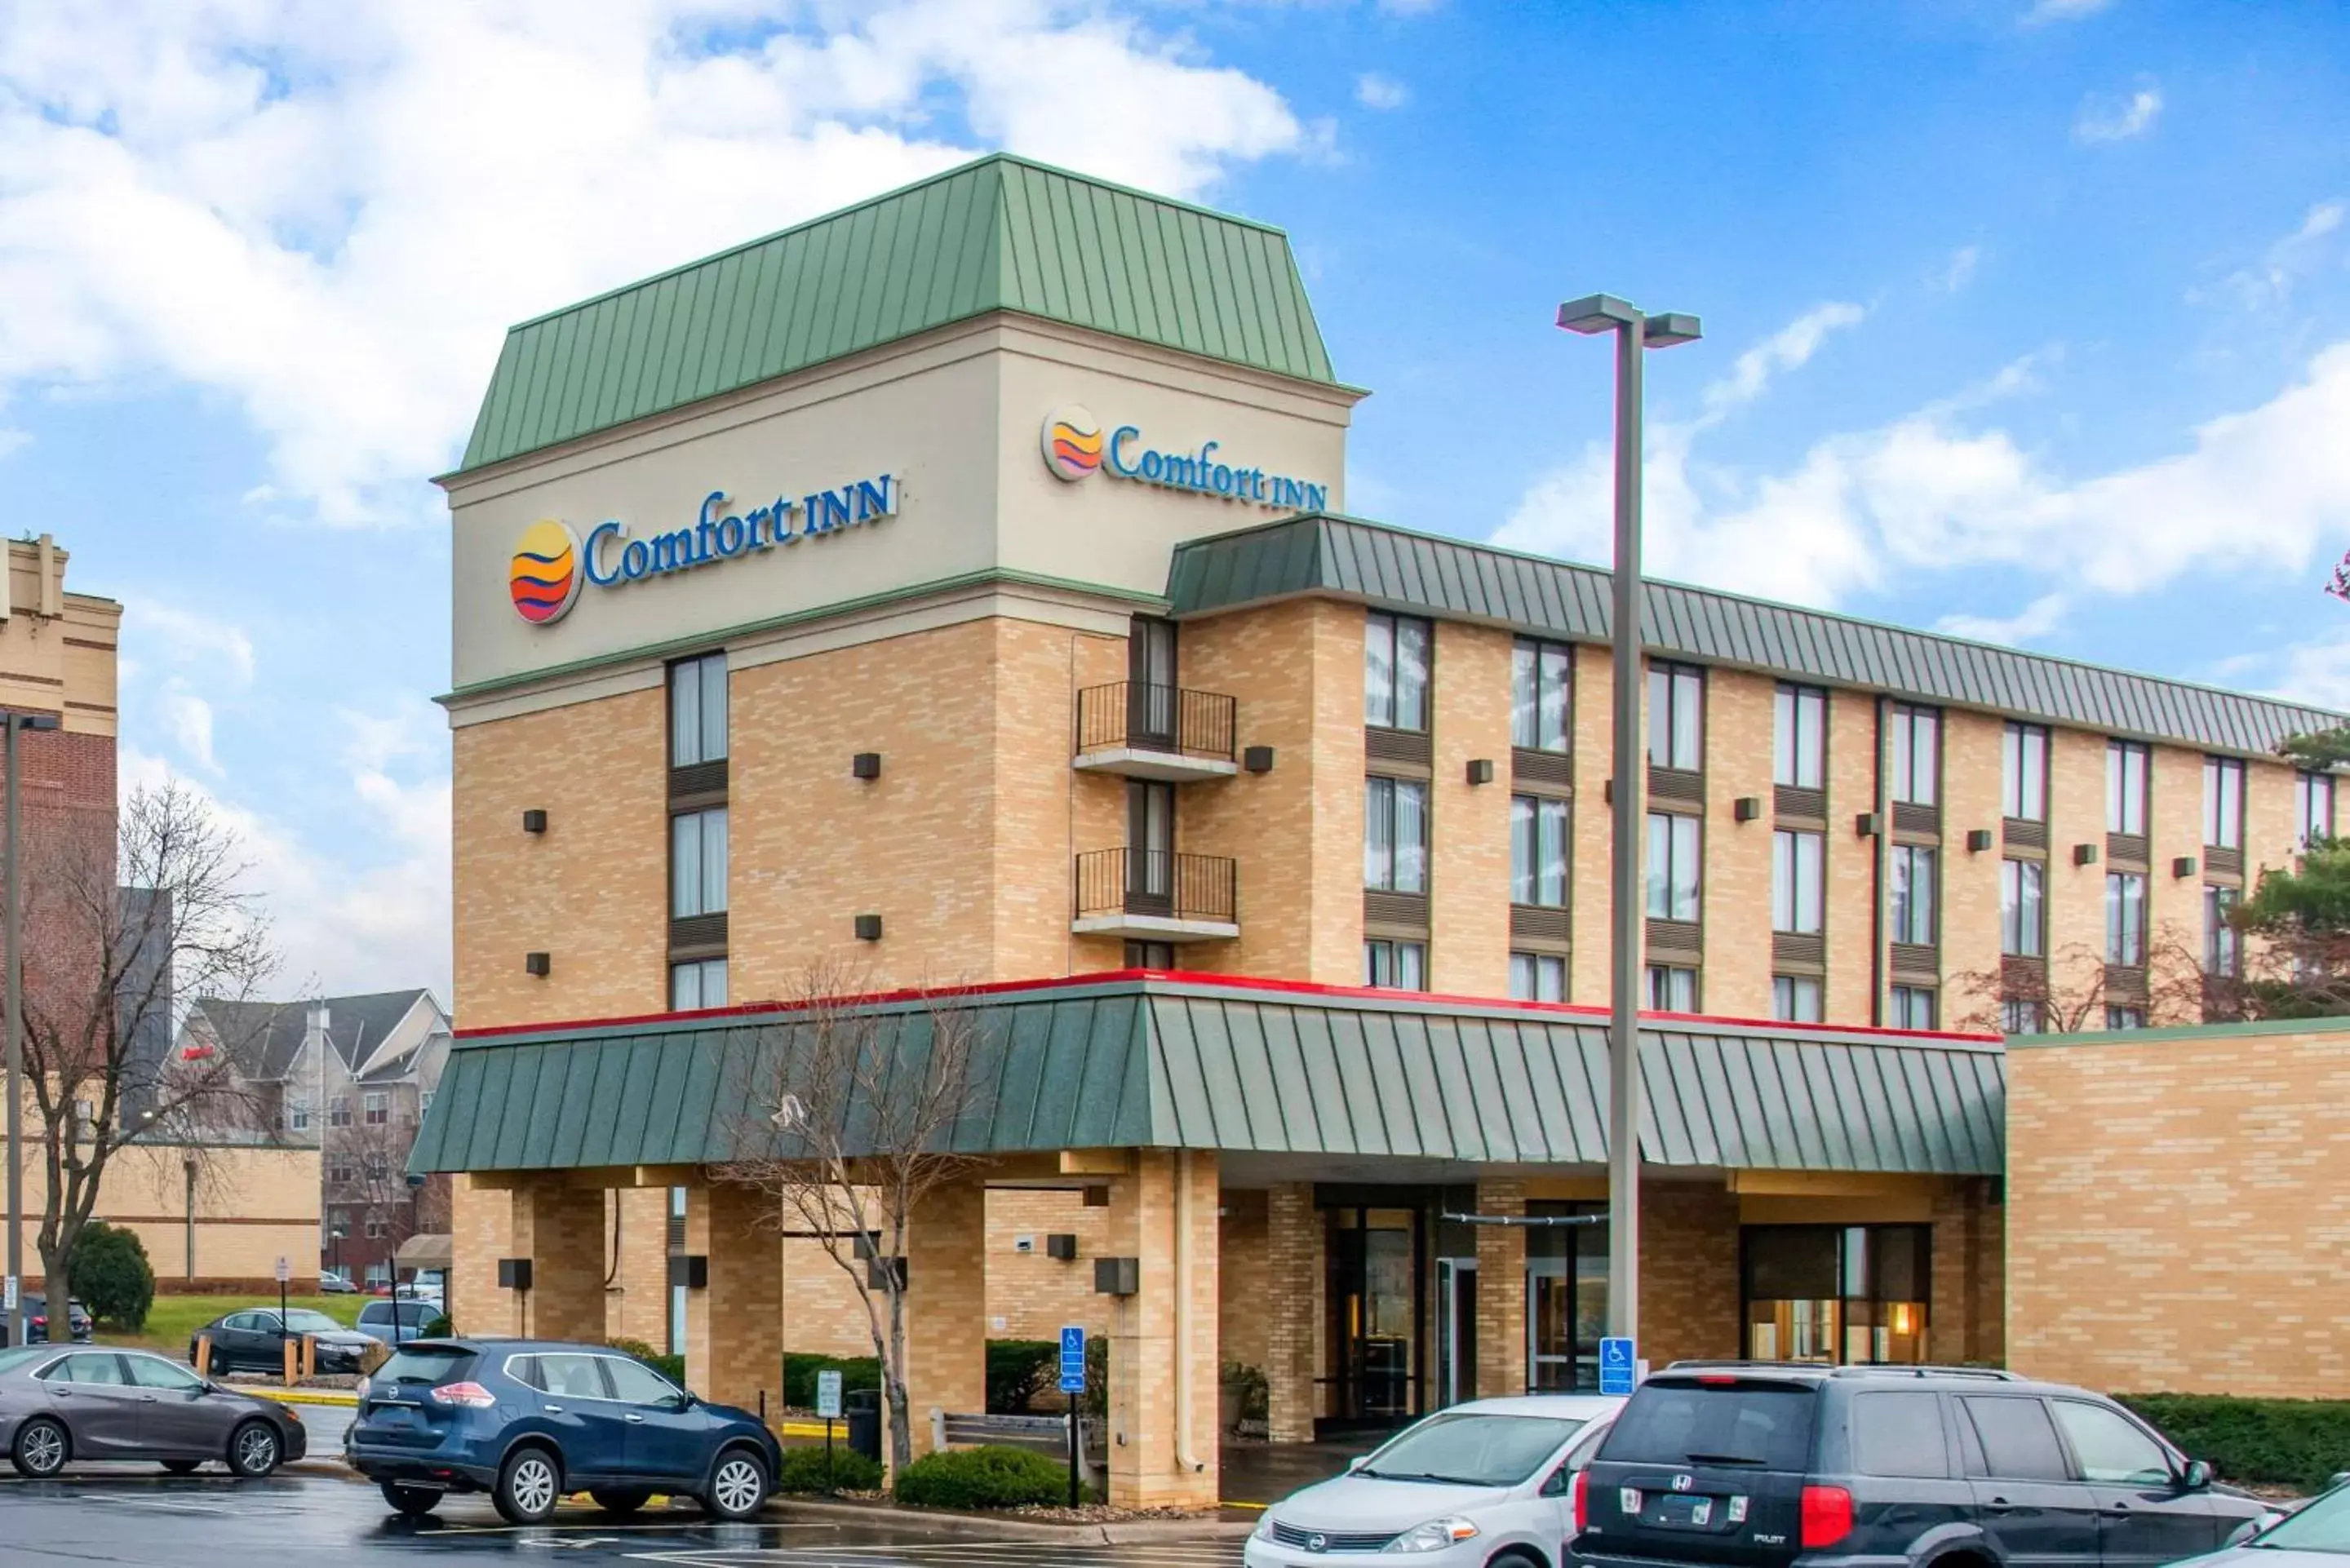 Property building in Comfort Inn MSP Airport - Mall of America